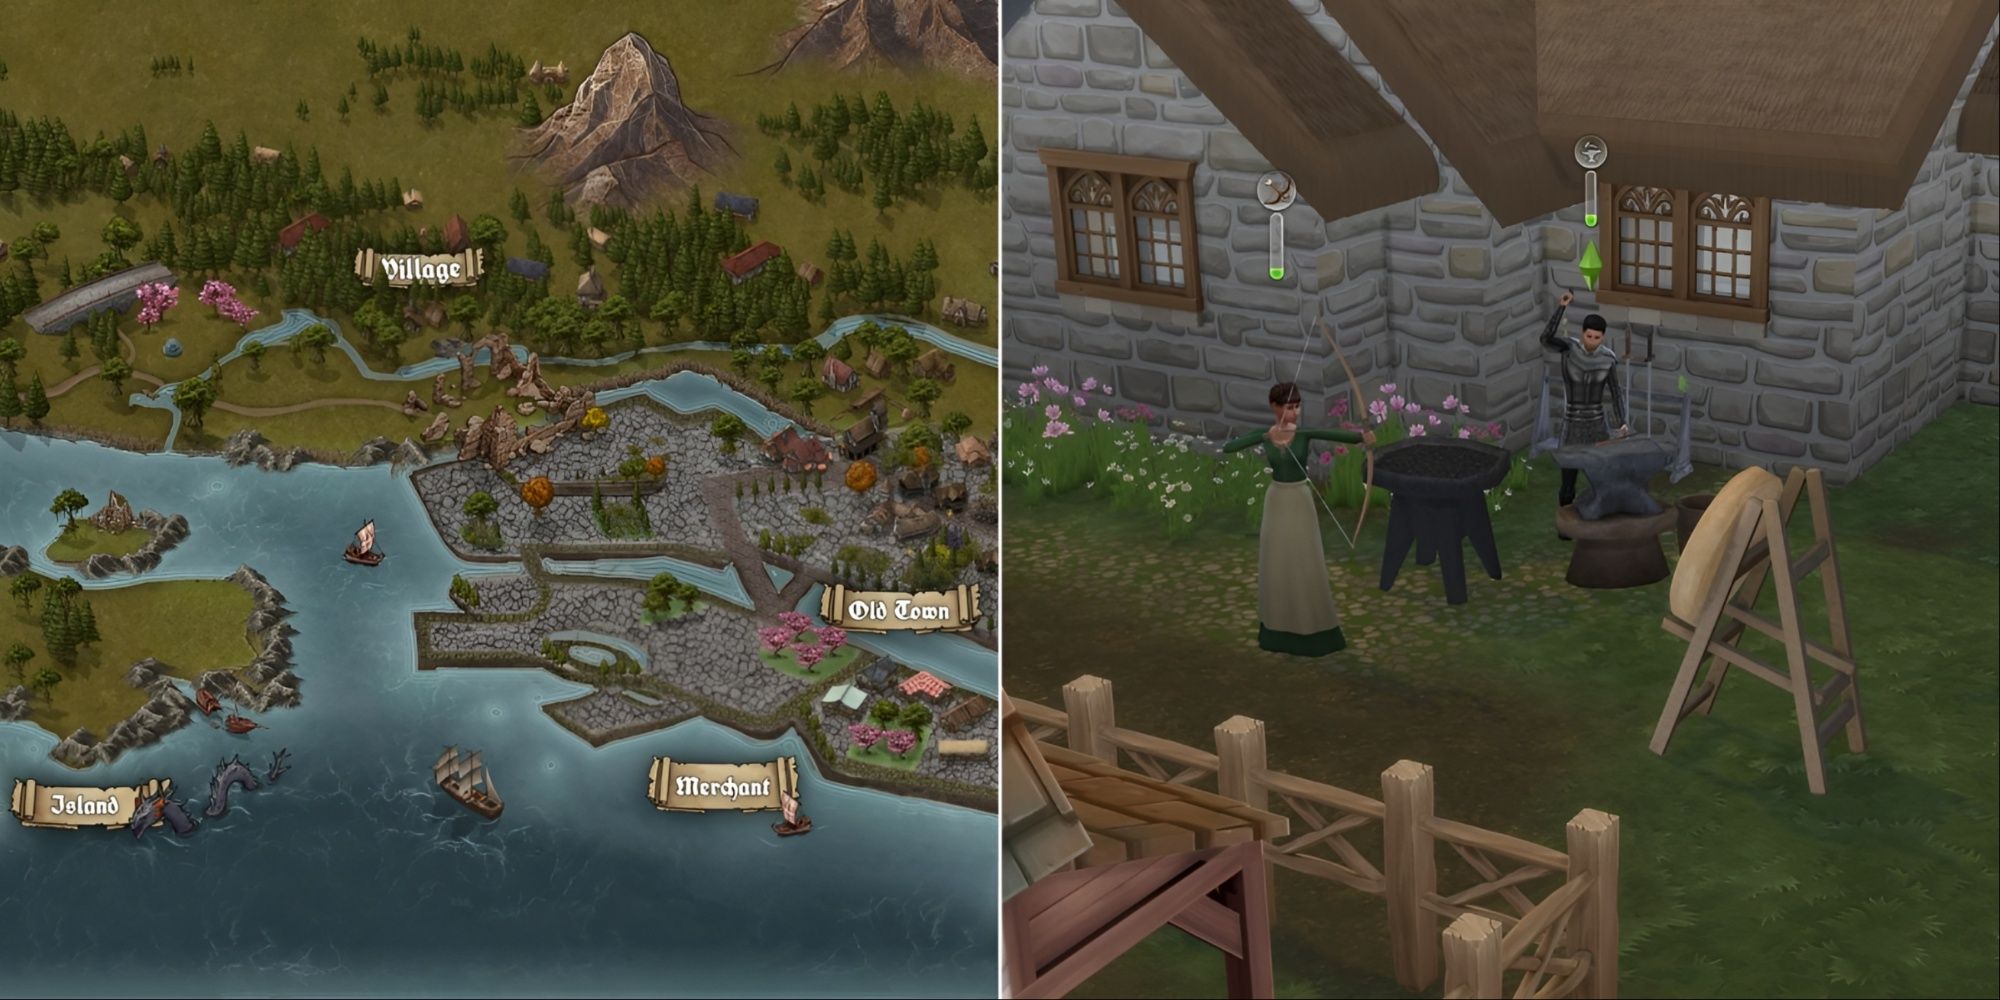 Map of Medieval Windenburg on the left and two Sims practicing archery & blacksmithing skills on the right